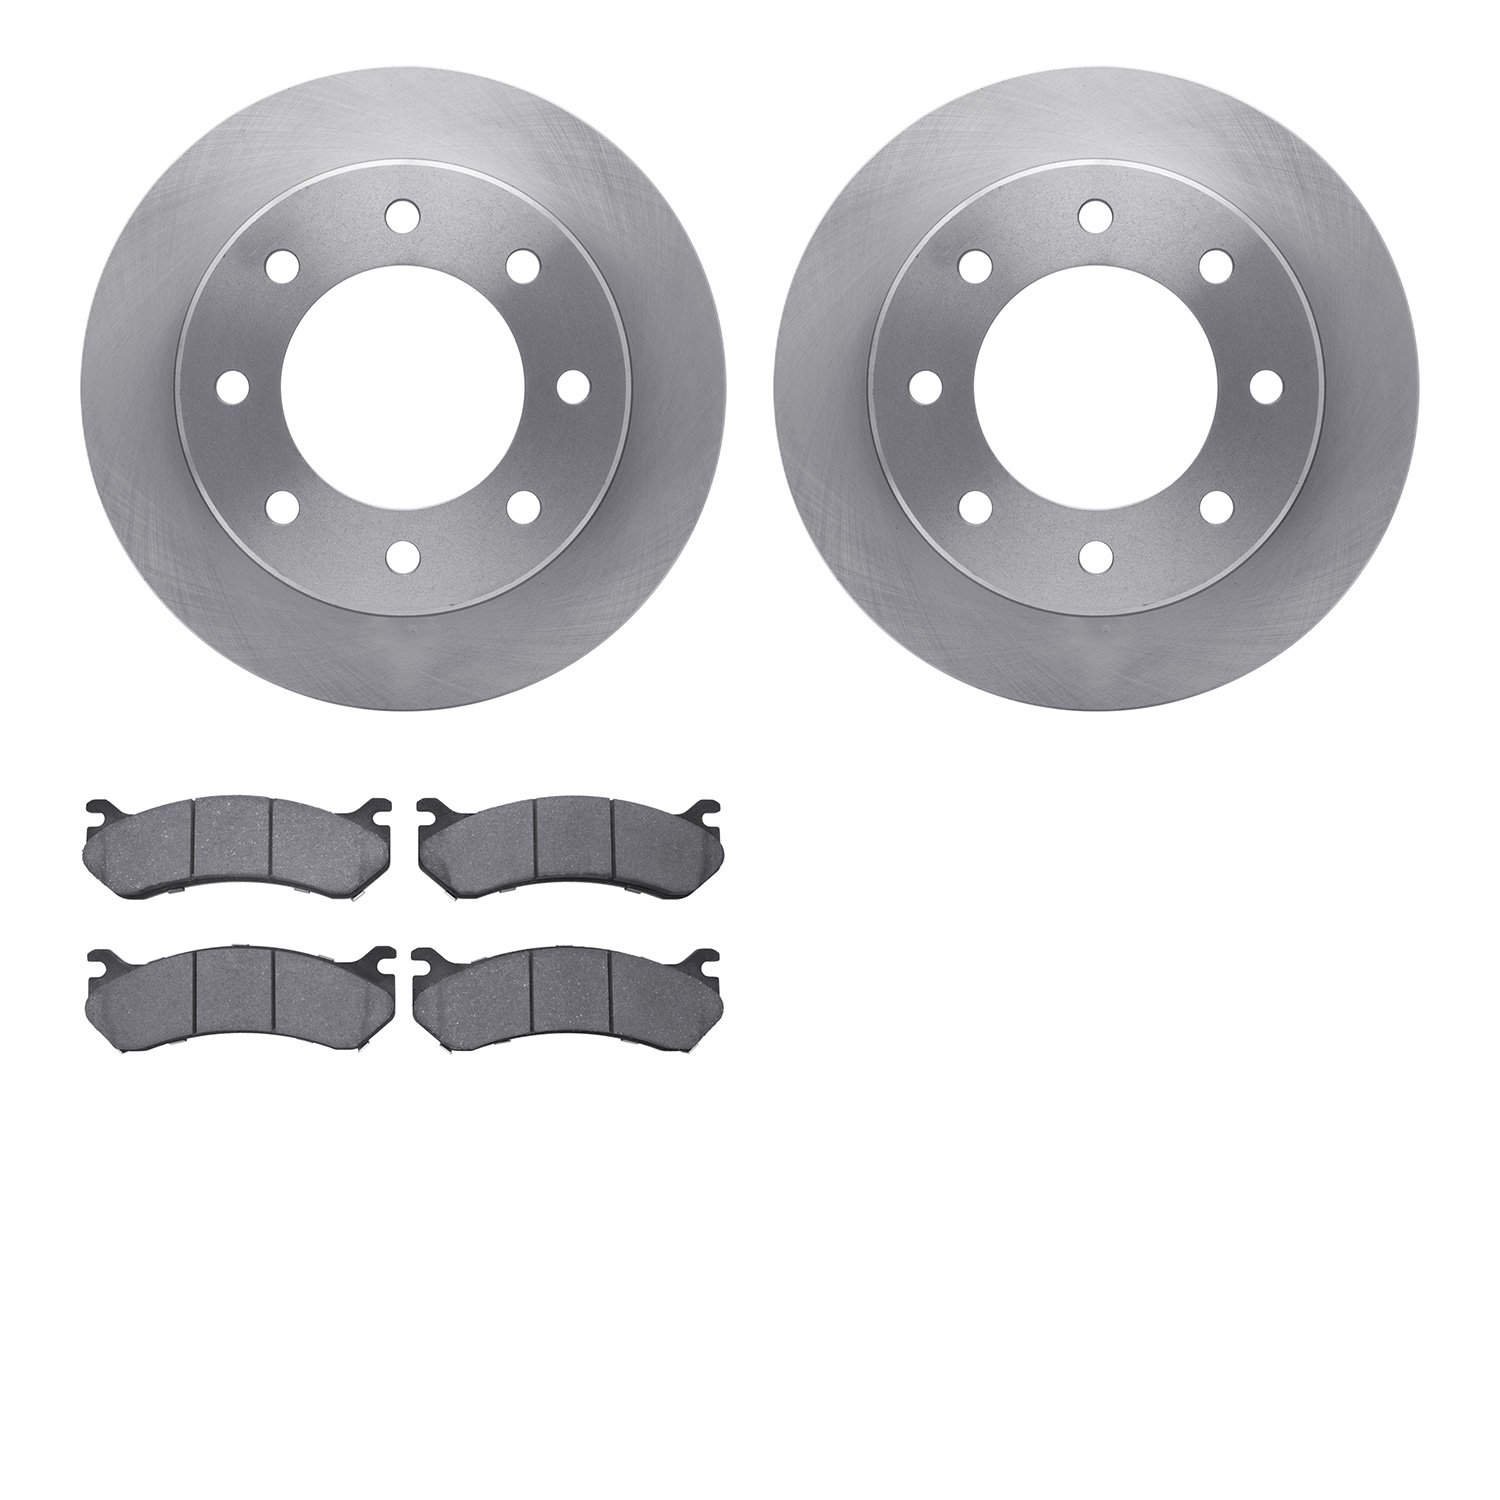 6402-48073 Brake Rotors with Ultimate-Duty Brake Pads, 1999-2009 GM, Position: Rear